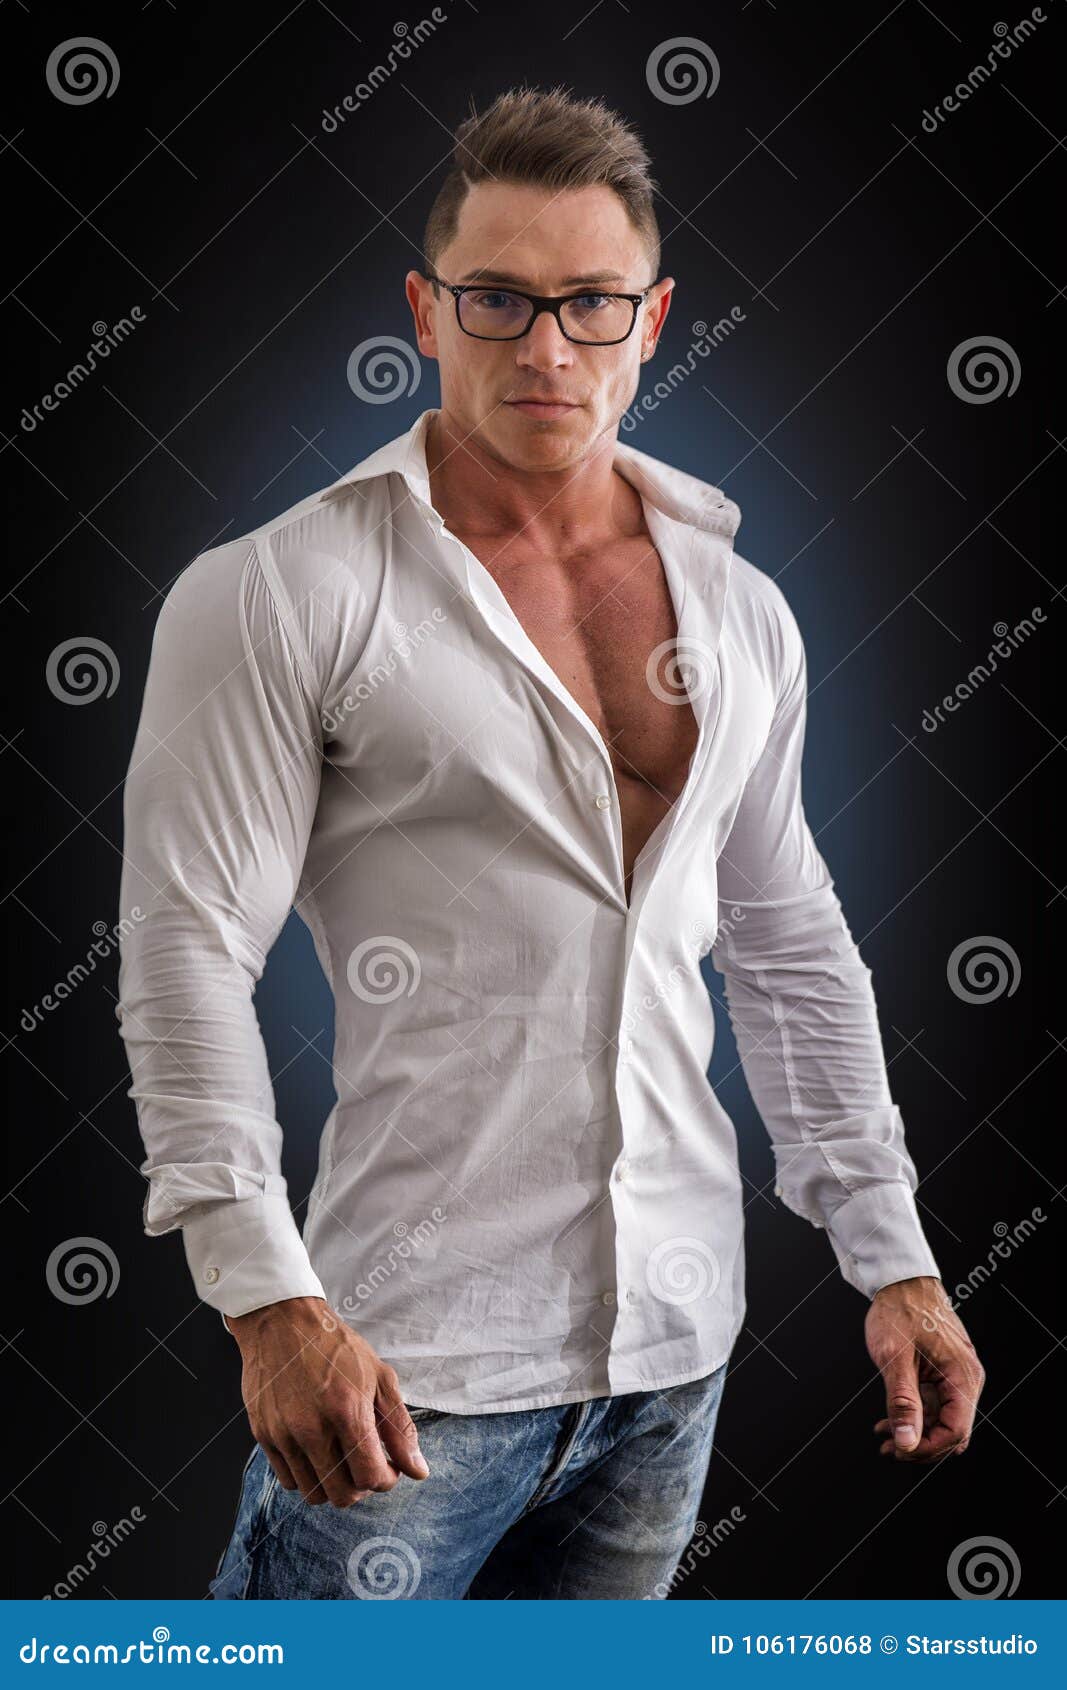 dorky man with glasses and muscle chest under shirt